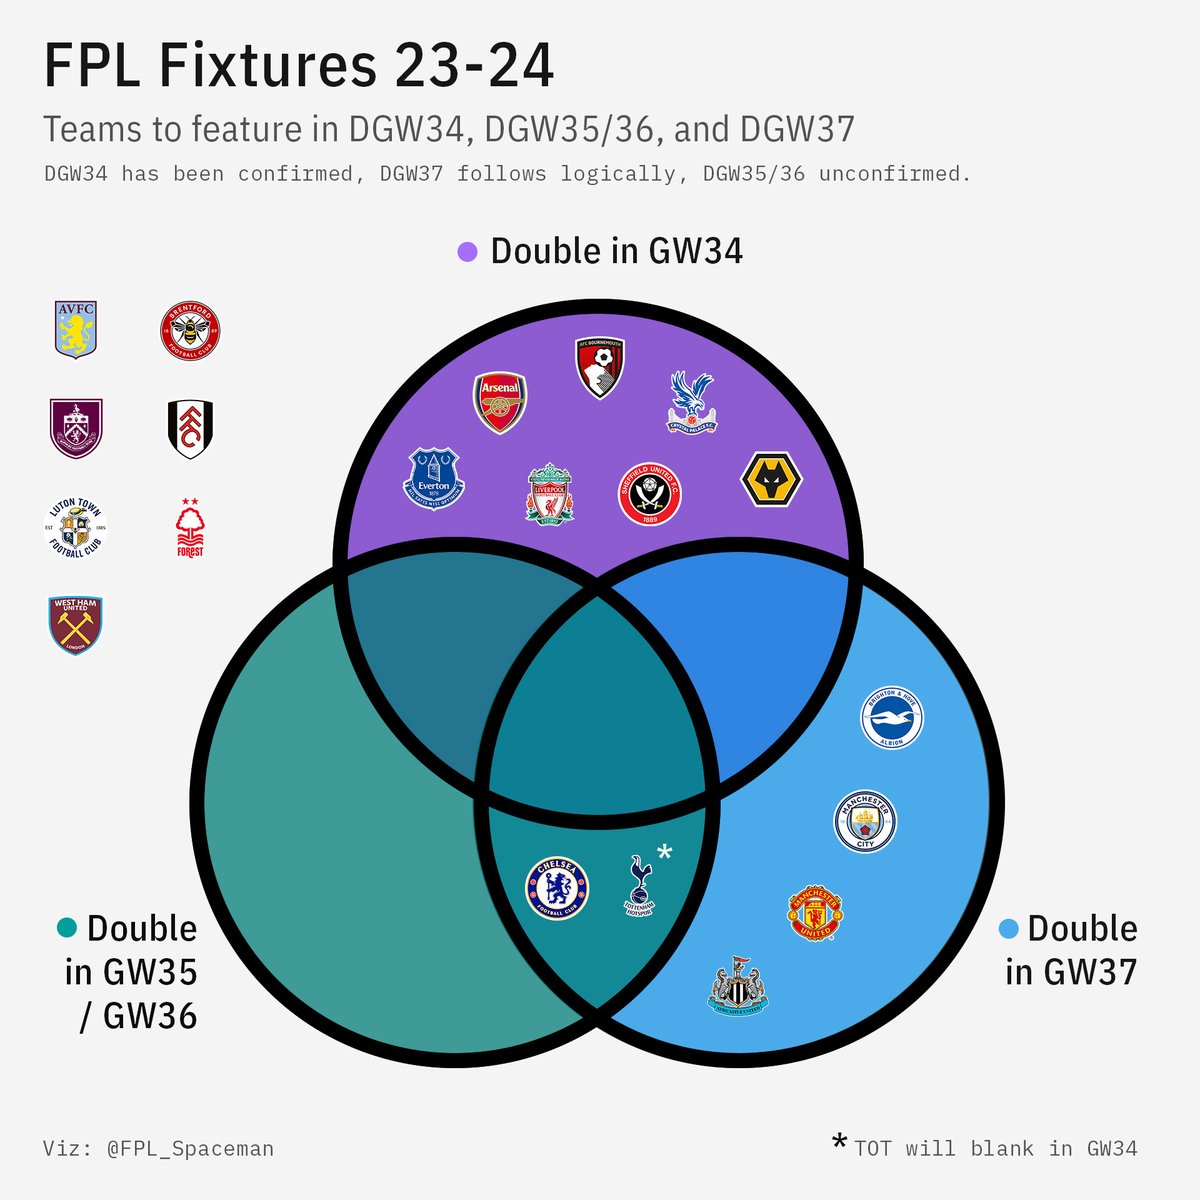 #FPL predicted doubles and blanks for remainder of the season - All DGW34 fixtures have been confirmed now ✅ - CHETOT is most likely to go into GW36 midweek, but could be GW35 - DGW37 fixtures follow from the confirmed DGW34 fixtures - Those outside the chart cannot double